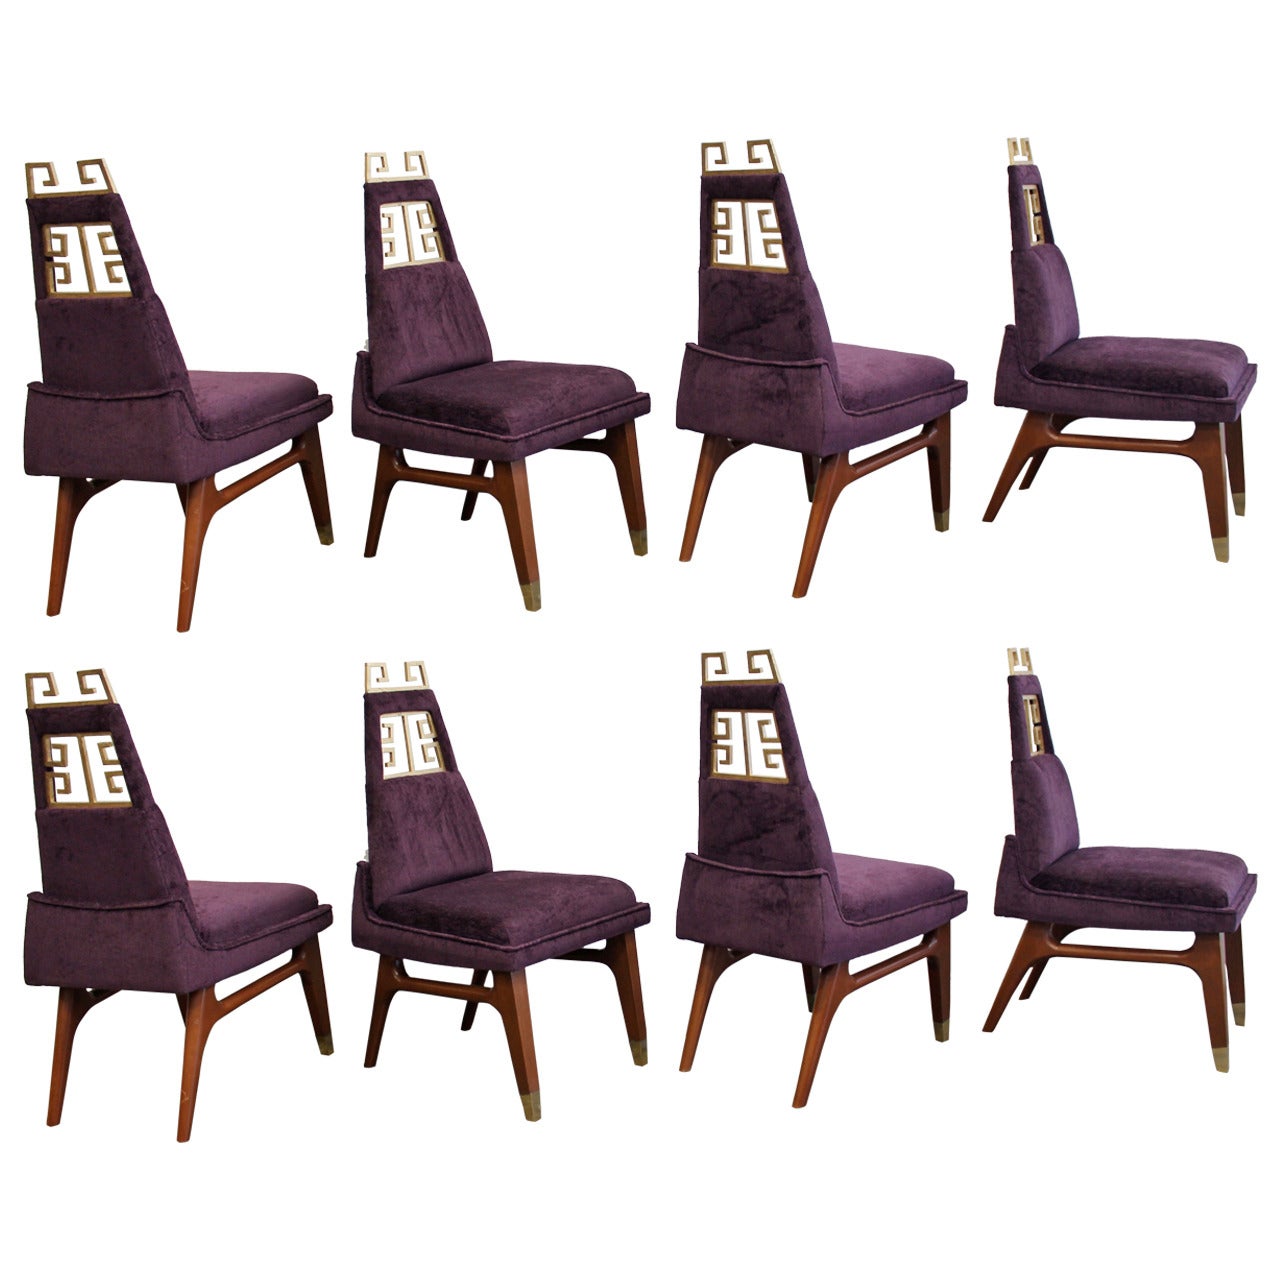 Set of Eight Greek Key Chairs by Arturo Pani, Mexico City, circa 1950 For Sale